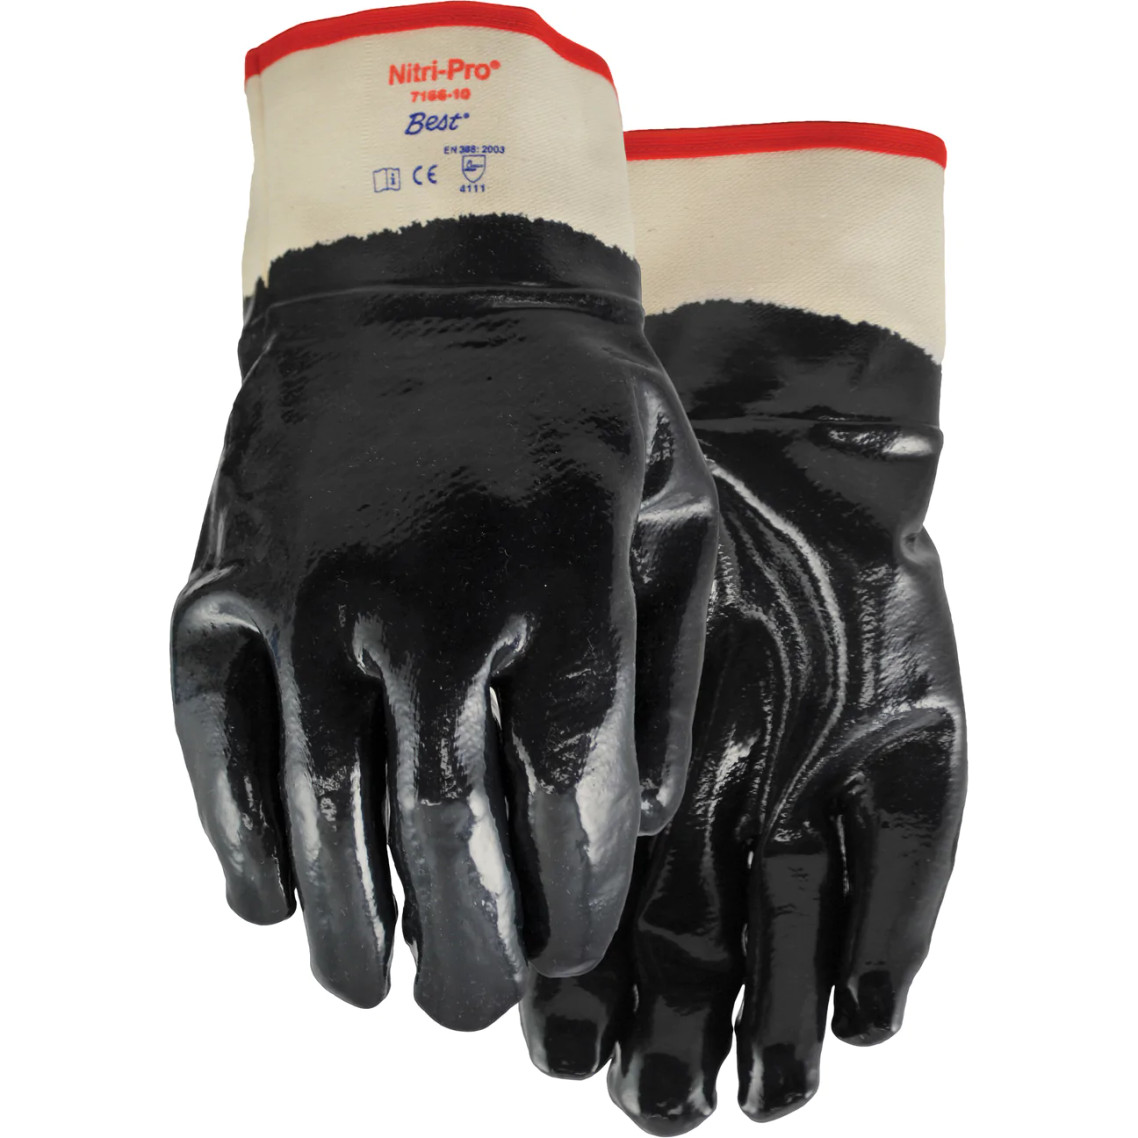 Forcefield Nitri-Pro® Foam Nitrile Coating, Jersey/Cotton Shell Glove - Size 10 (12 Pairs/Box) | SafetyApparel.ca